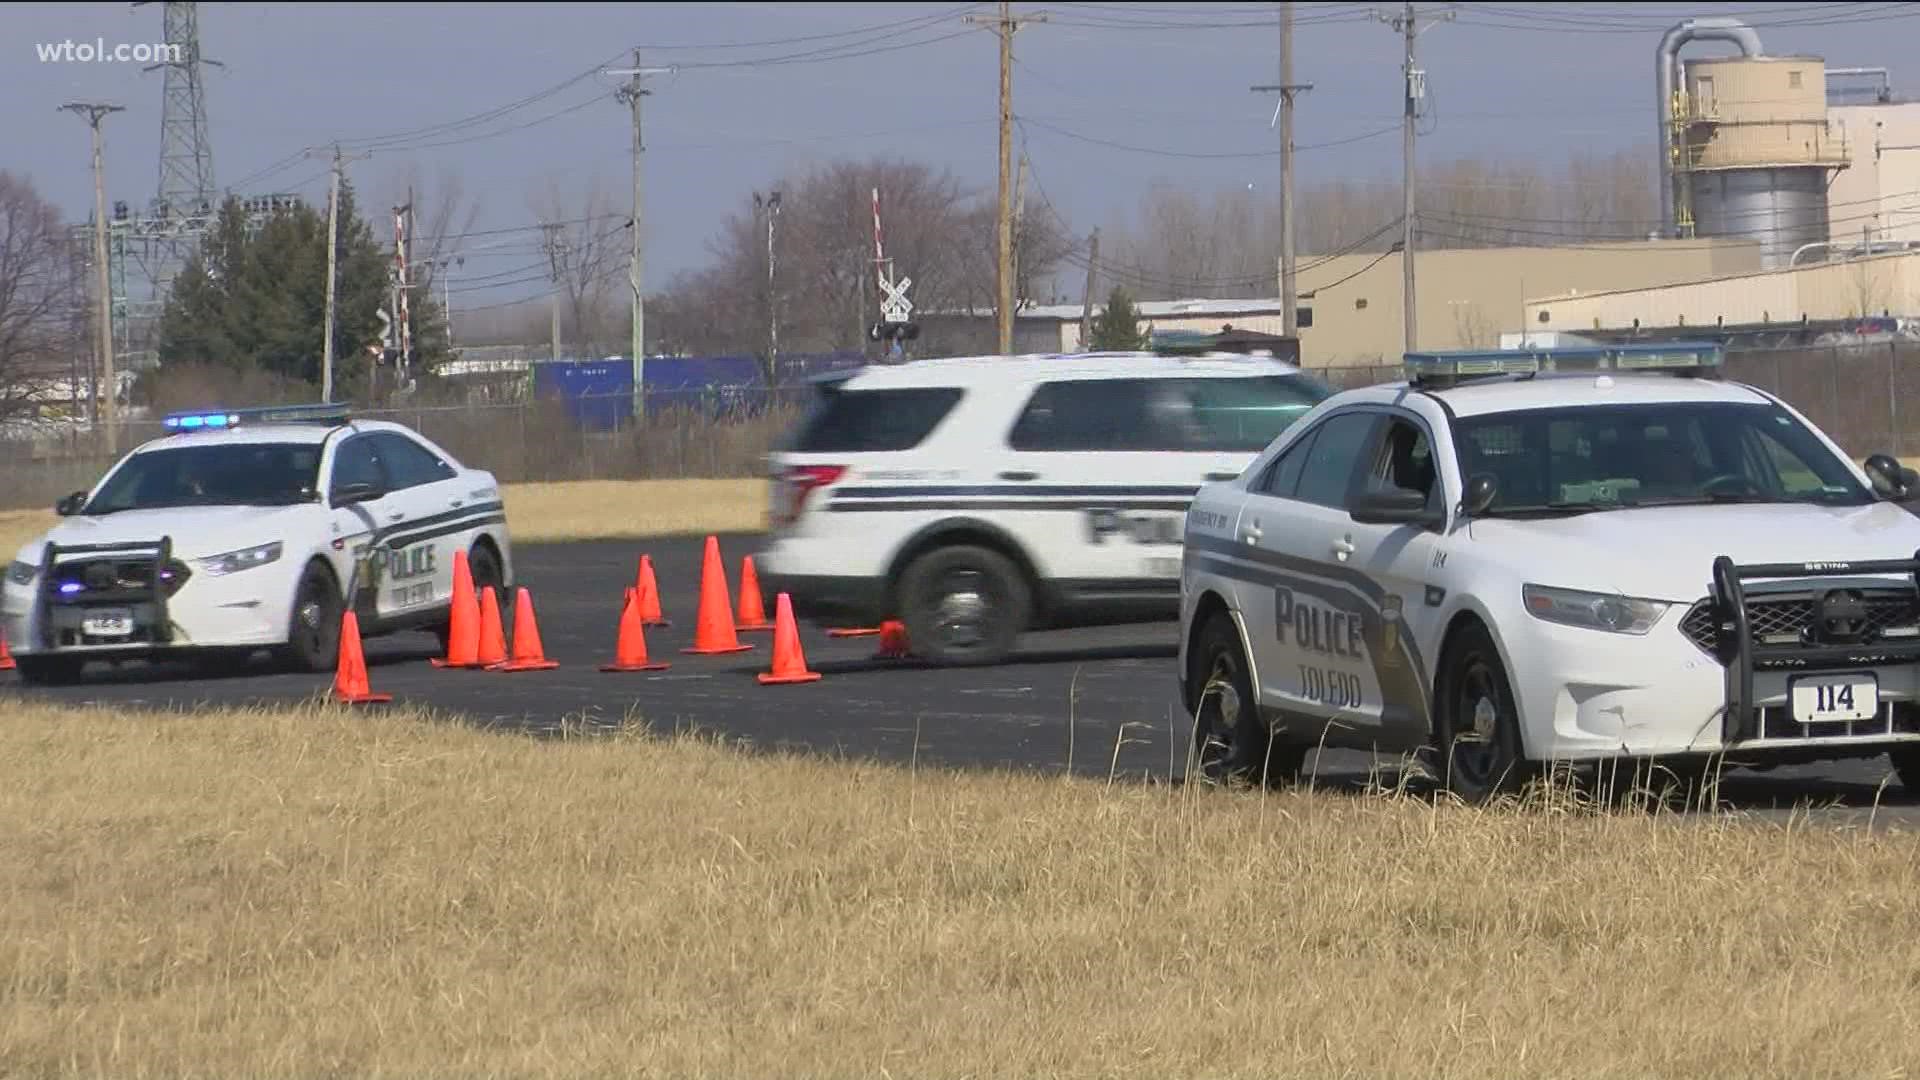 After dozens of polices chases already this year, WTOL 11 joined officers for a ride-along to get a closer look at how Toledo police train for pursuits.